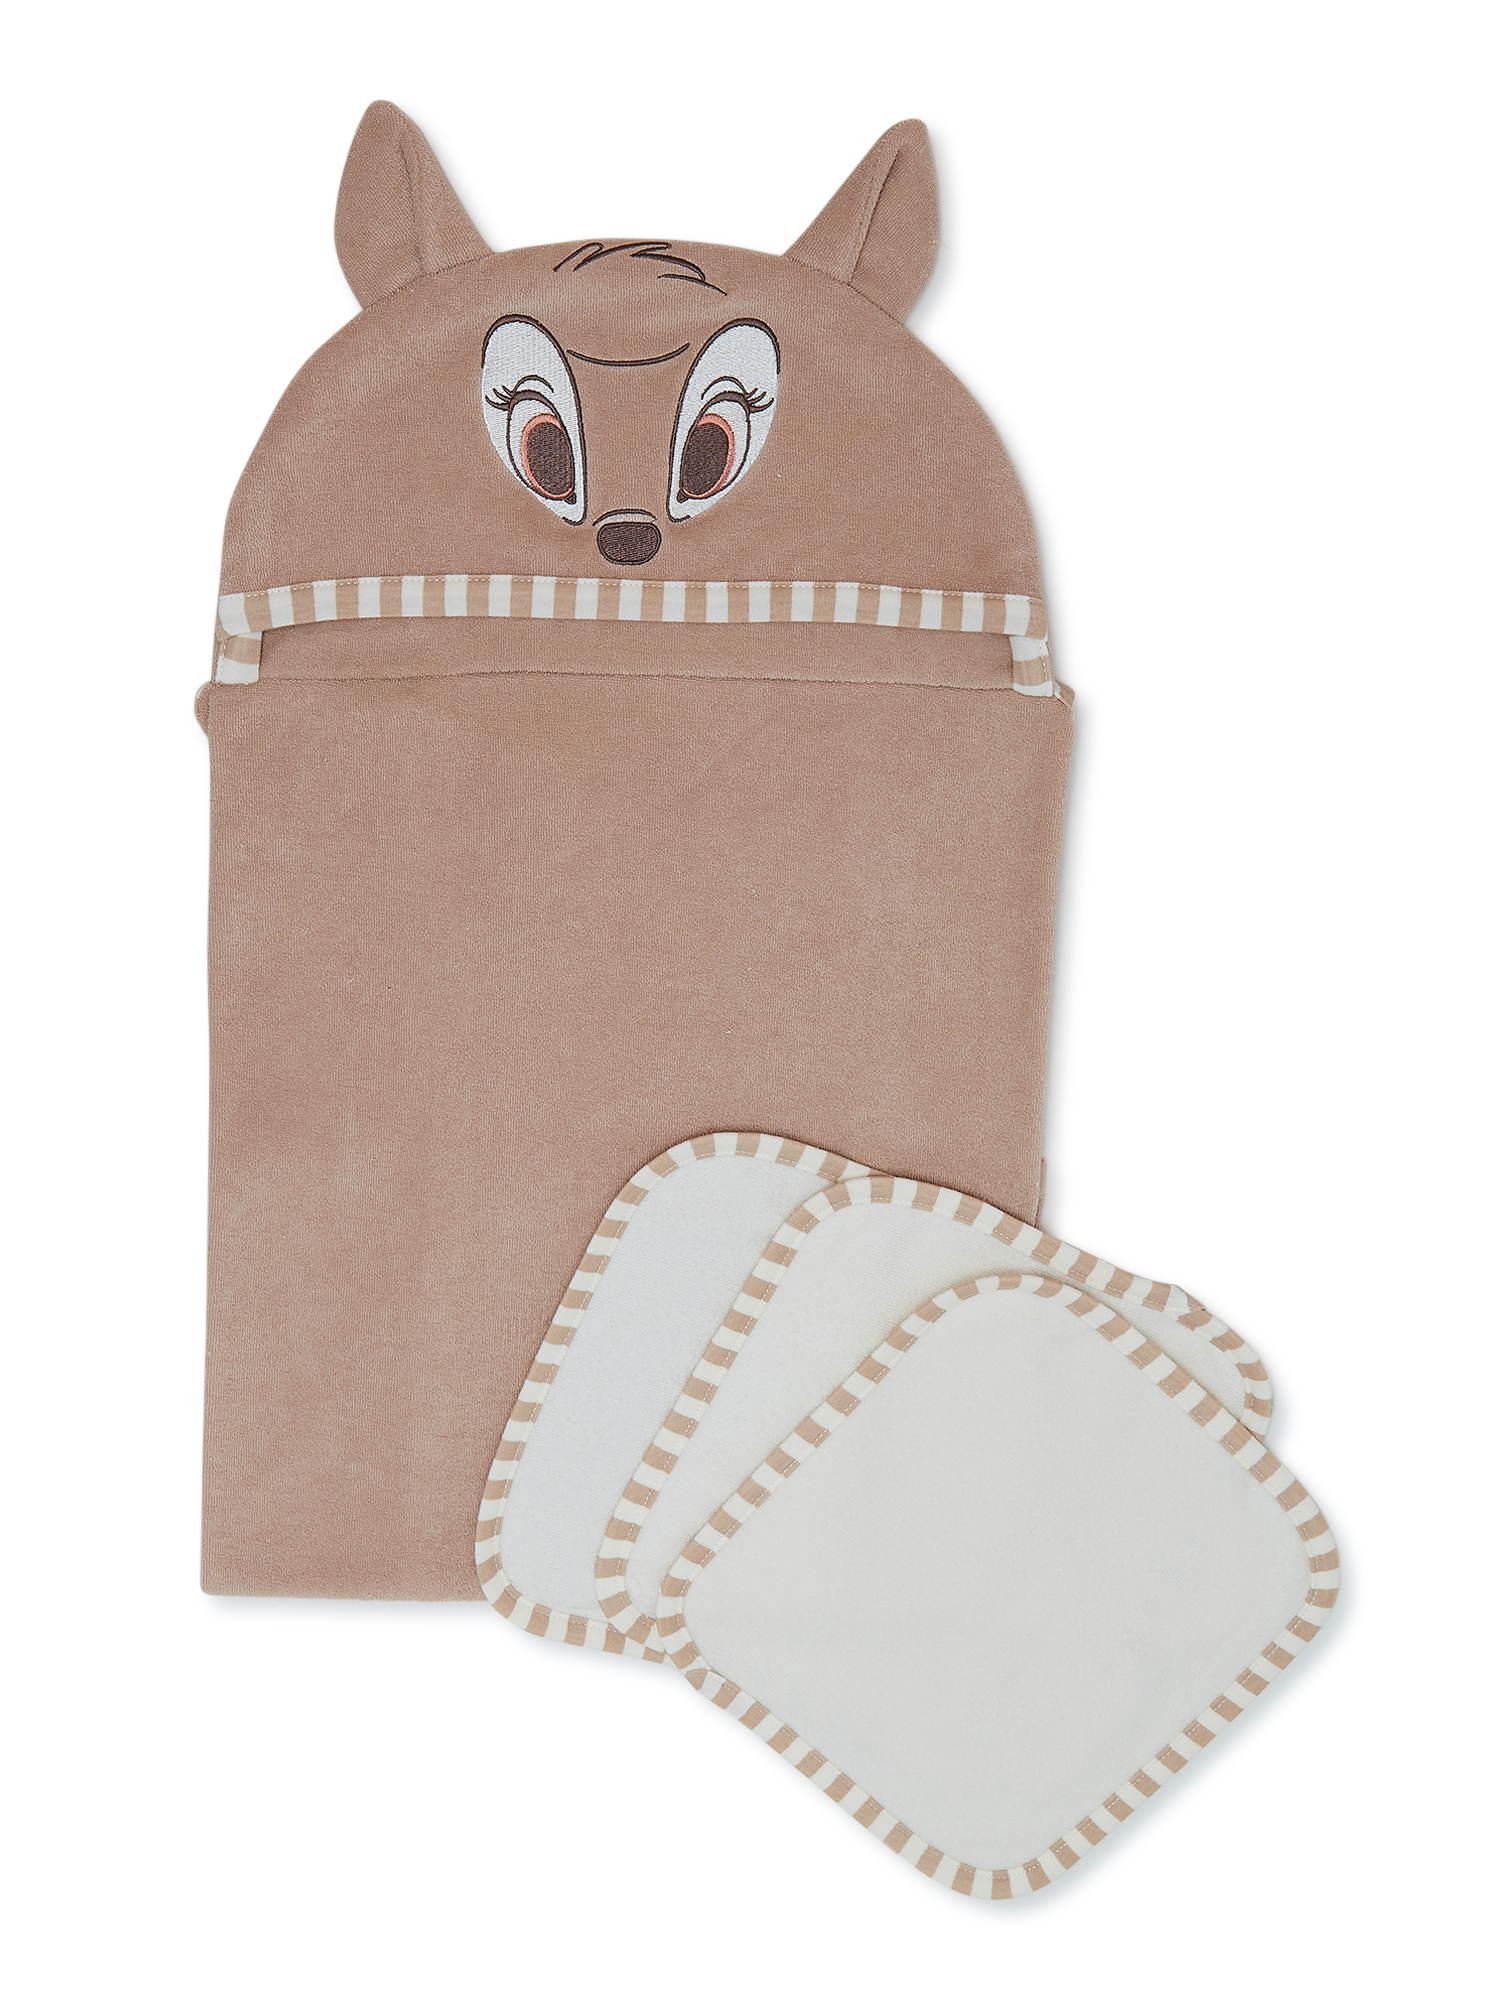 Disney Baby Bambi Baby Neutral Infant Bath Set, Hooded Towel and 3 Washcloths - image 2 of 4